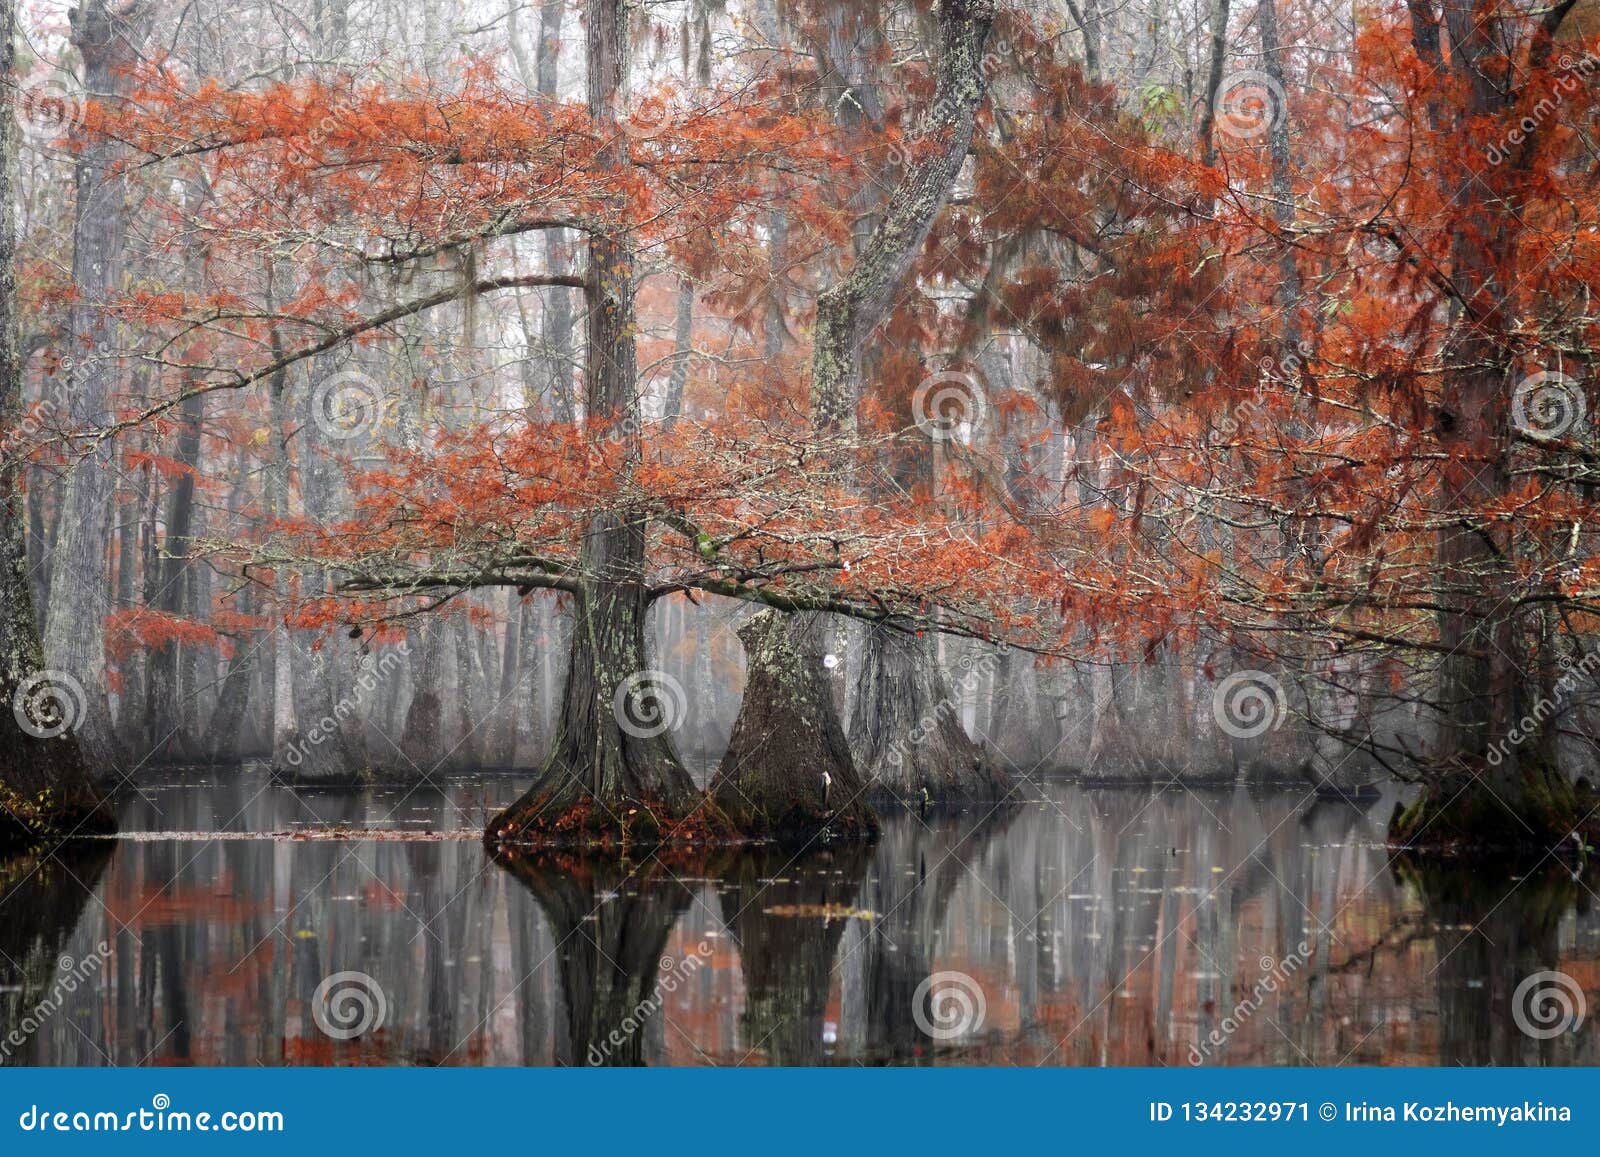 Fish Black Crappie Pomoxis Nigromaculatus Caught on the Yo-Yo Automatic  Fishing Reels. Beautiful Bald Cypress Trees in Autumn Stock Image - Image  of hold, background: 134232971